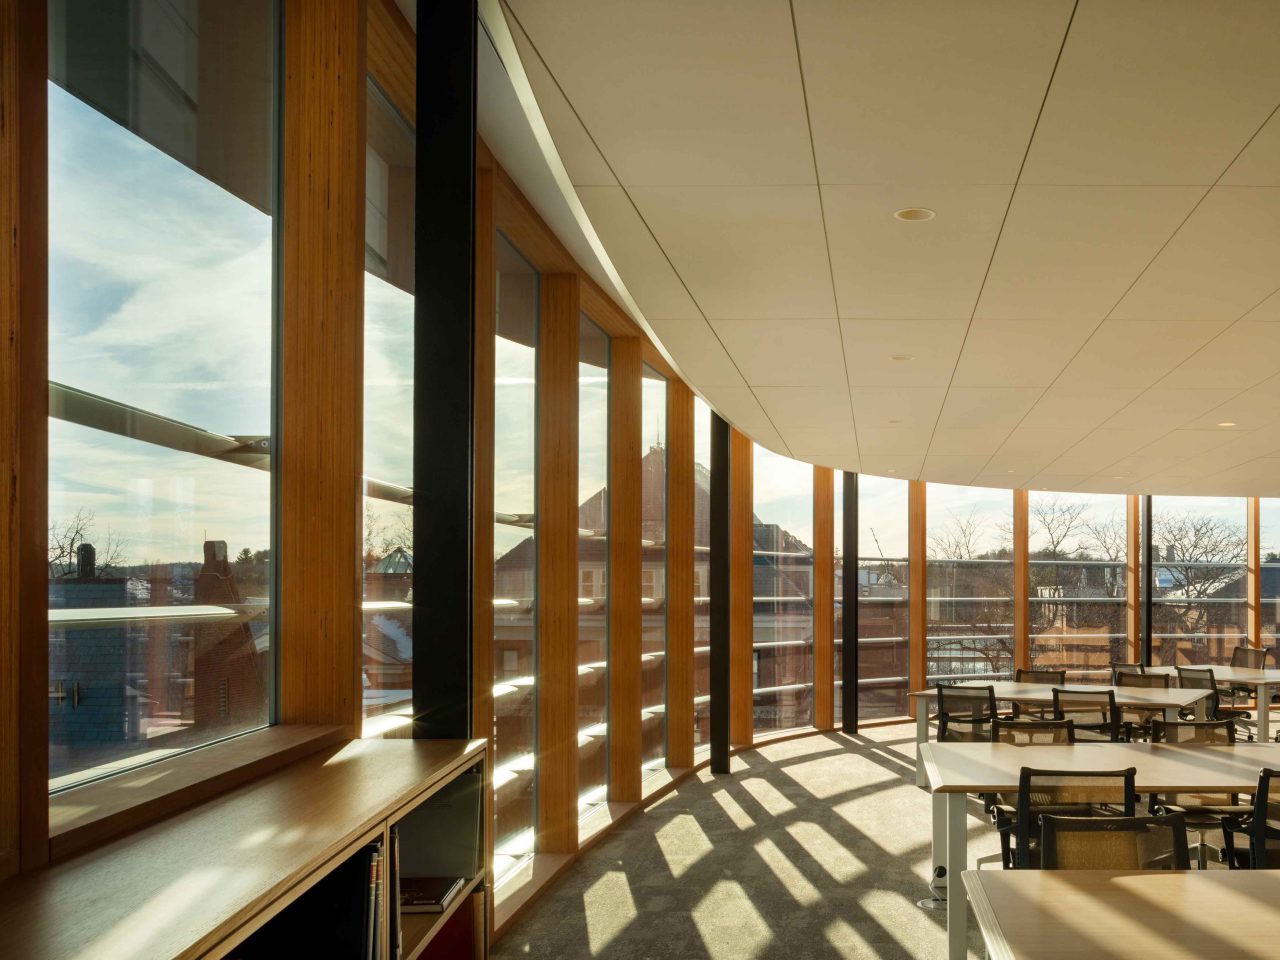 Smith College Neilson Library interior view wood facade with curved insulating glass